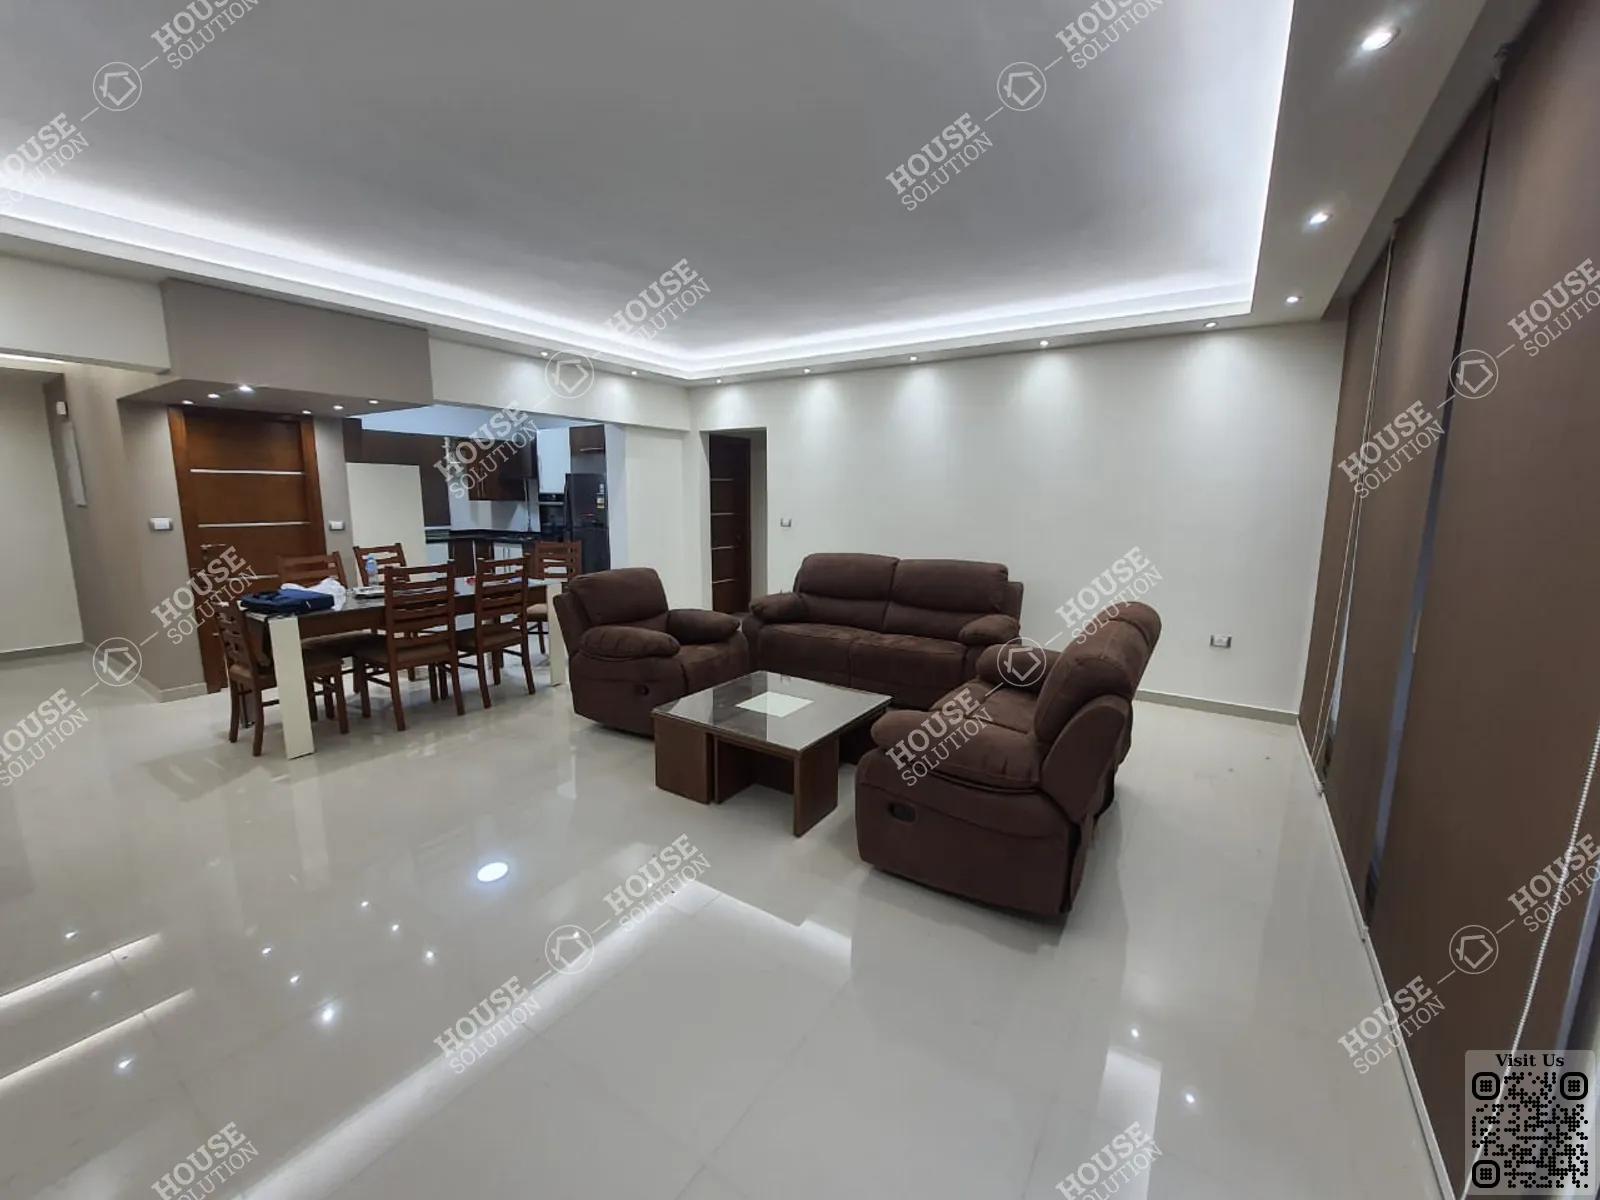 RECEPTION  @ Apartments For Rent In Maadi Maadi Sarayat Area: 120 m² consists of 2 Bedrooms 2 Bathrooms Modern furnished 5 stars #4975-0